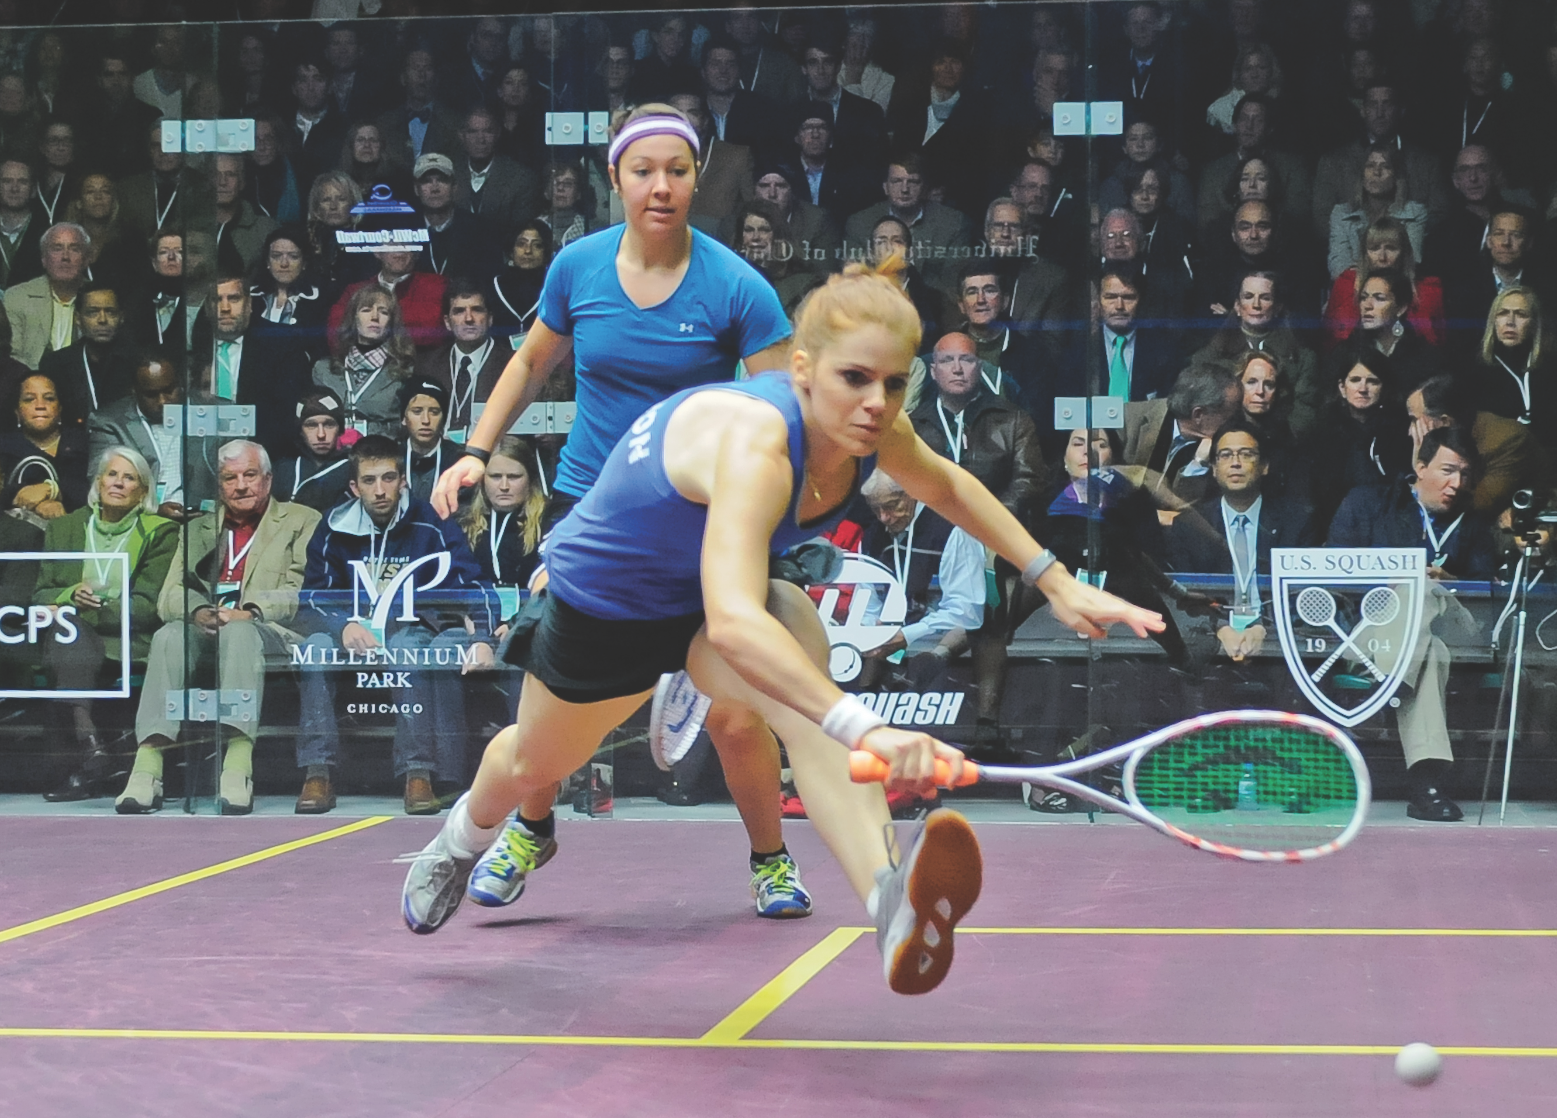 Vanessa Atkinson (front), who will be retiring after this year, had too much firepower for American Amanda Sobhy in the final. For Atkinson, it was her 22nd win on the WISPA tour.